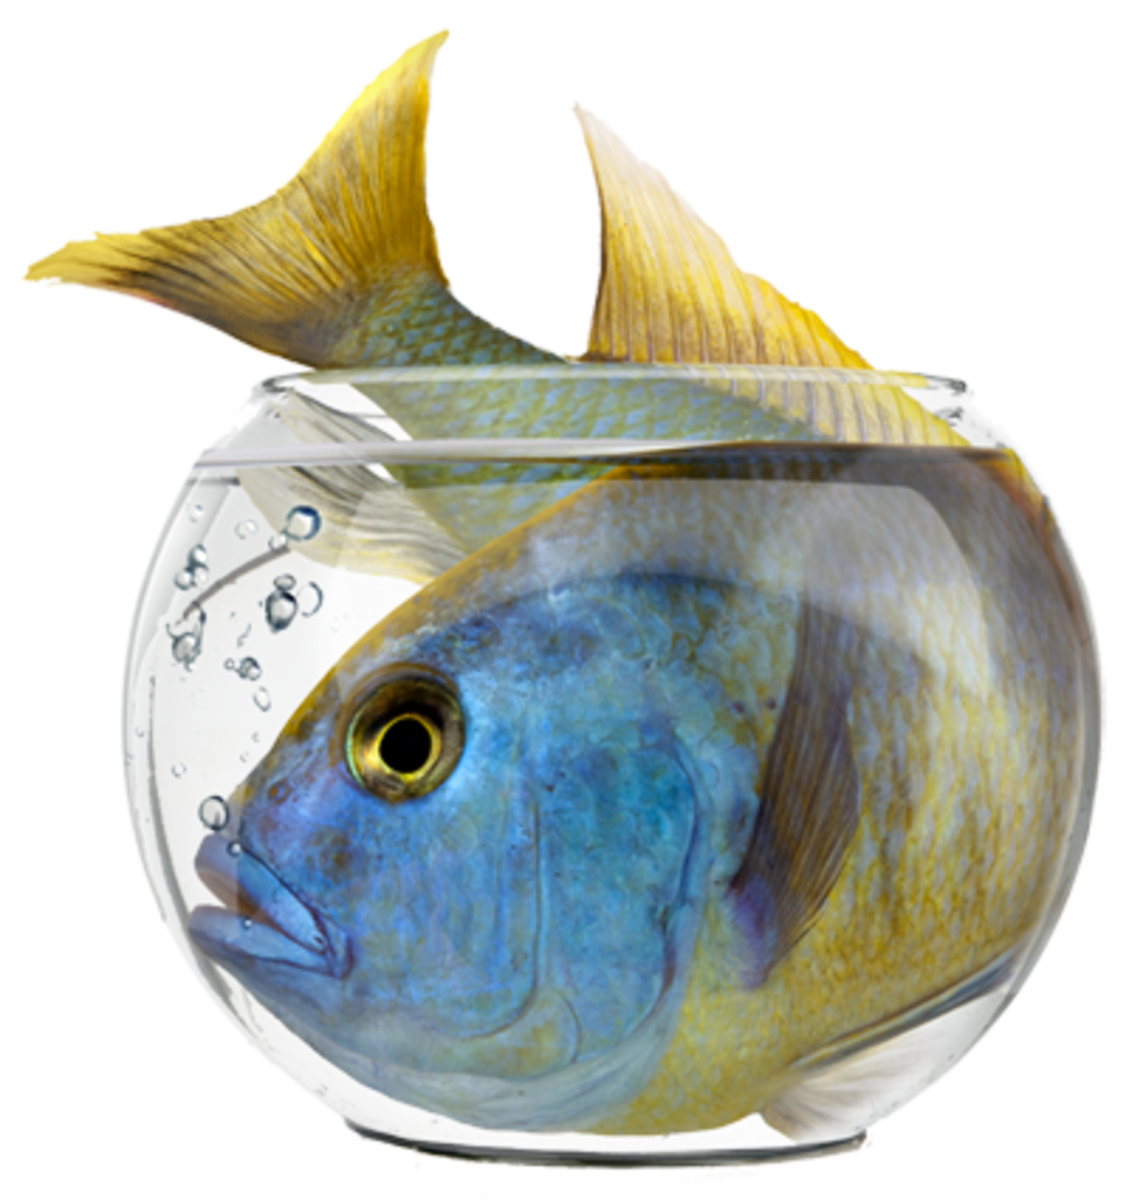 readily-available-fish-that-get-too-large-for-most-starter-aquariums.png